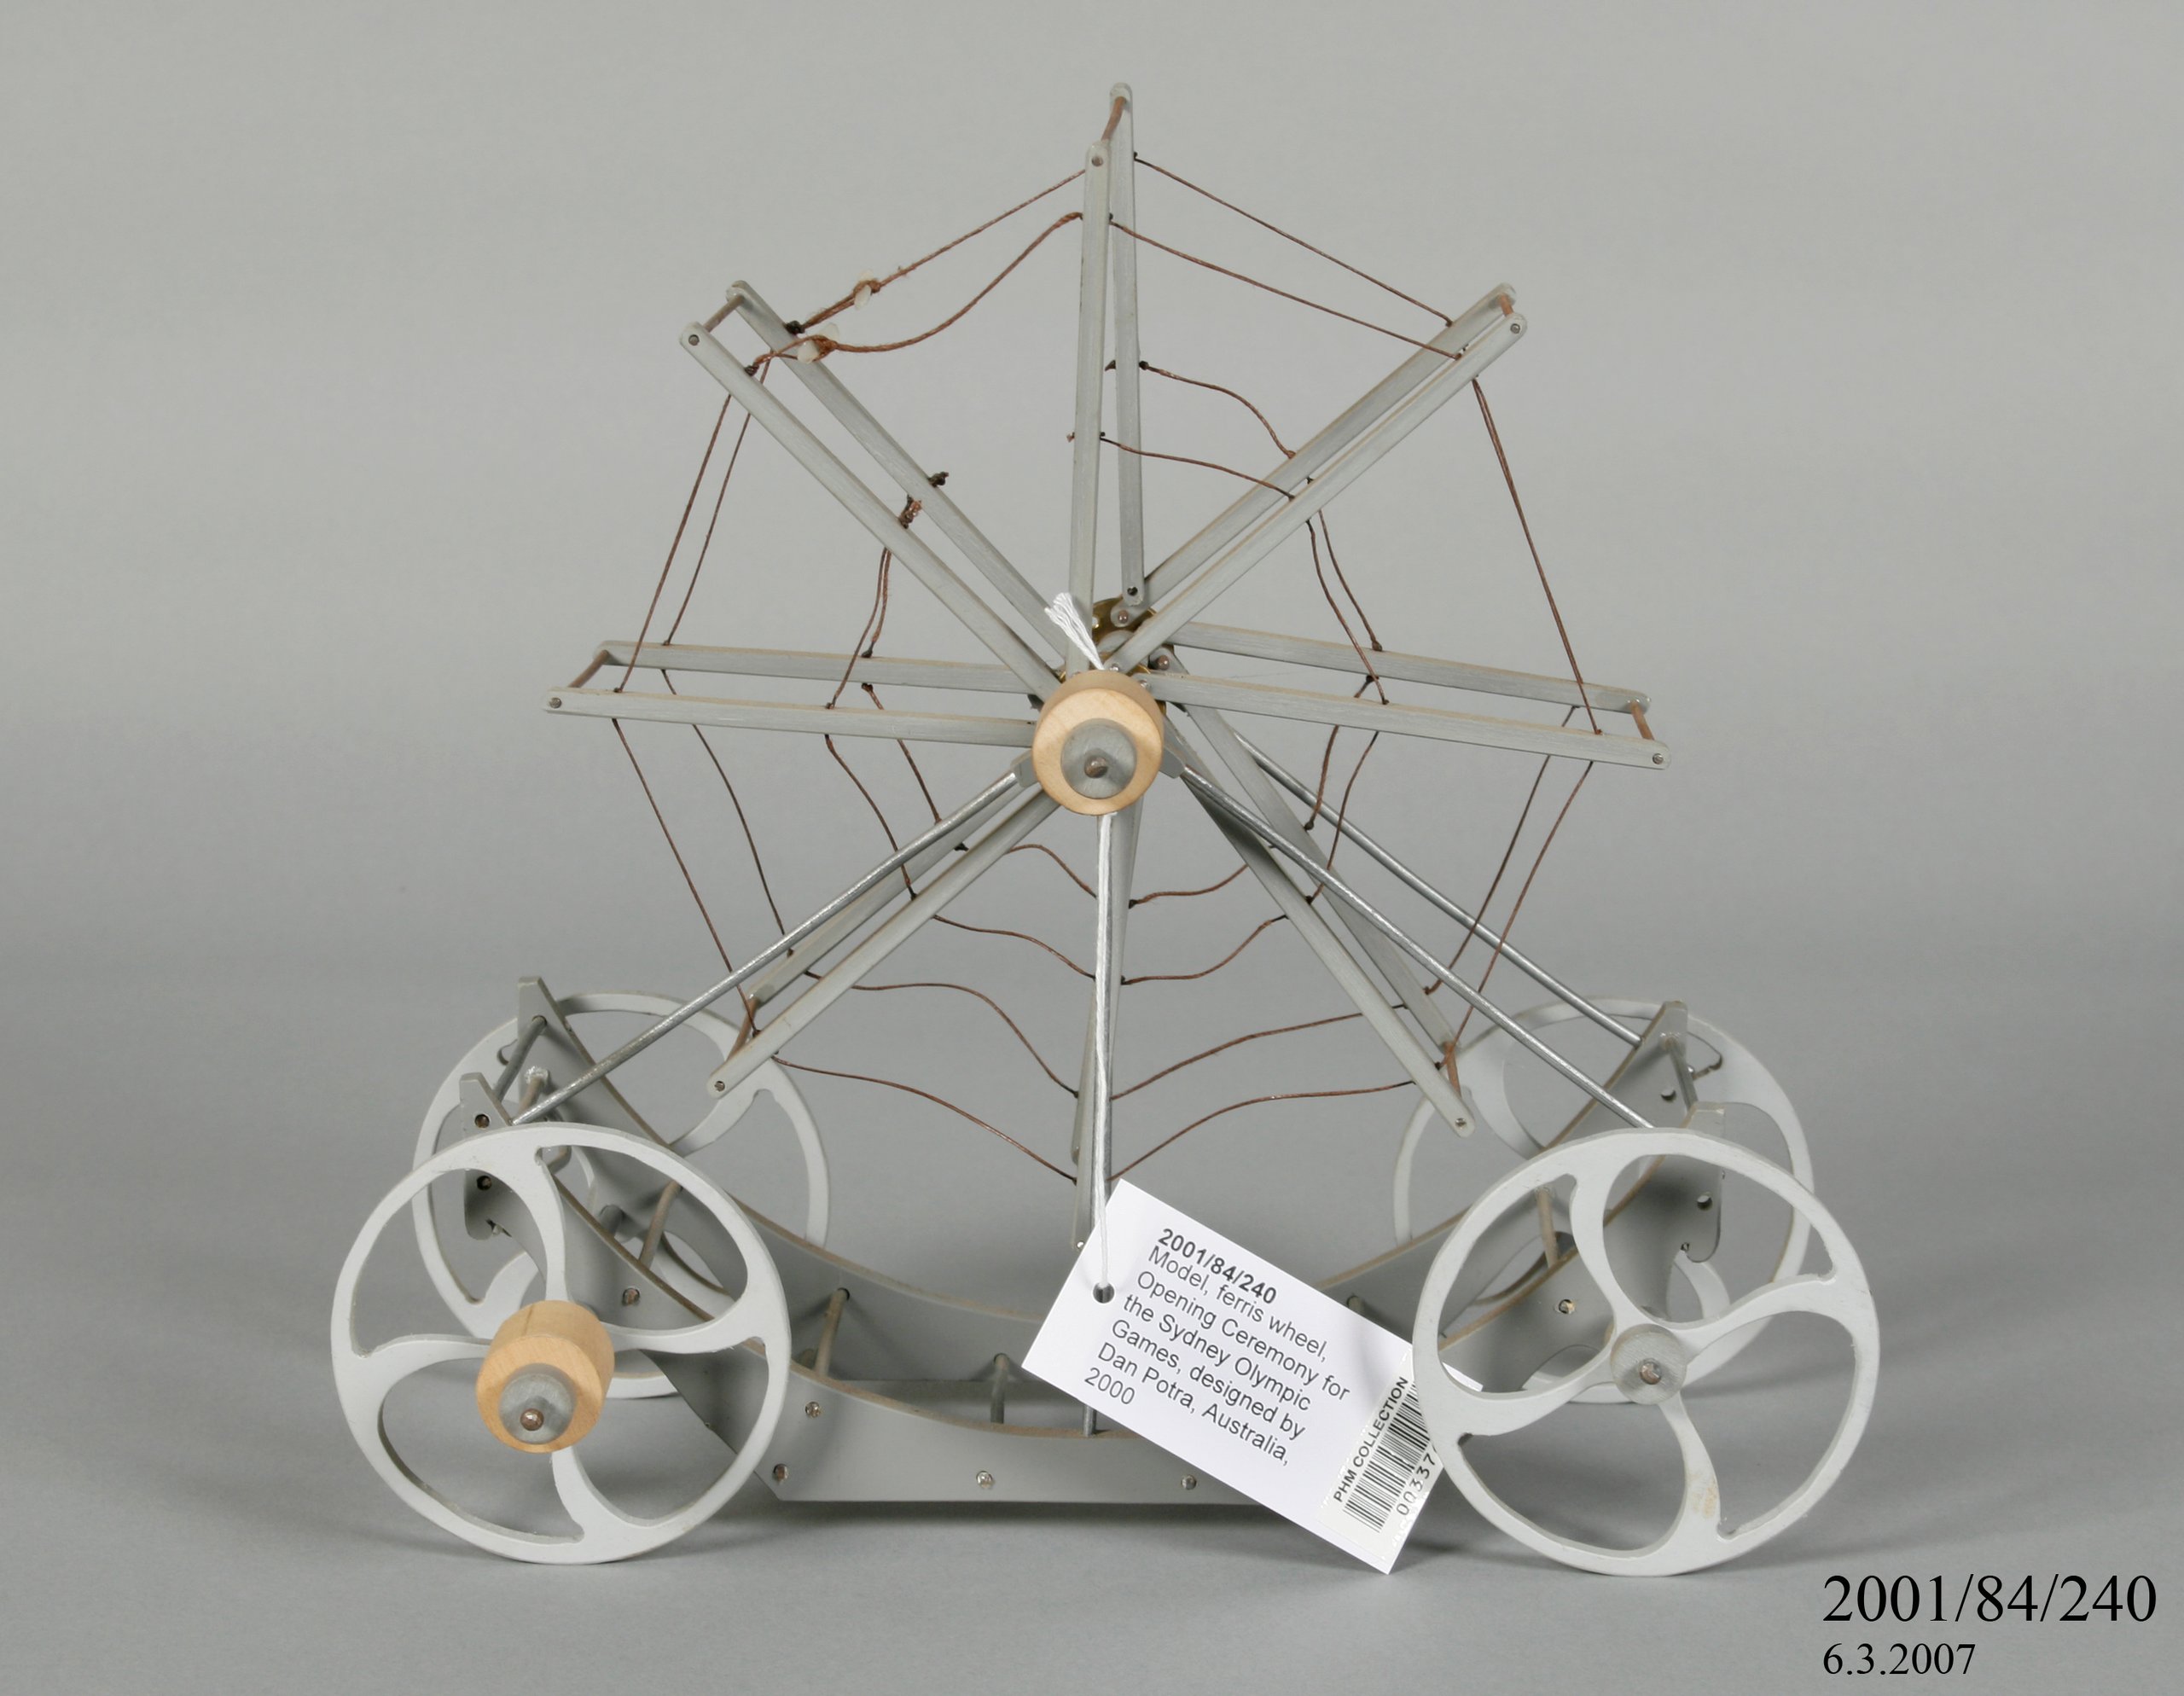 Model of a Ferris Wheel used in Sydney 2000 Olympic Games Opening Ceremony